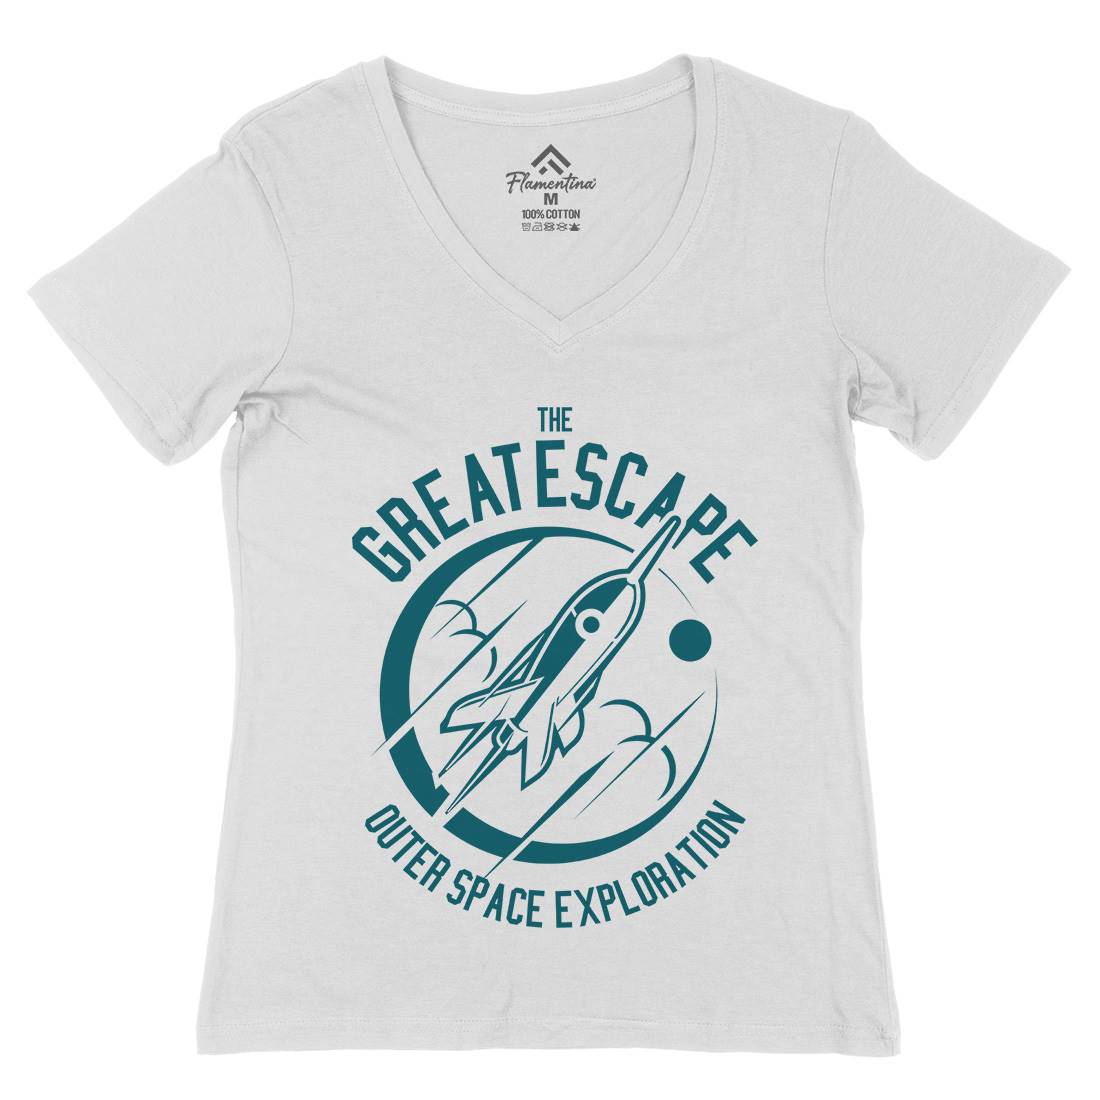 Great Escape Womens Organic V-Neck T-Shirt Space A292